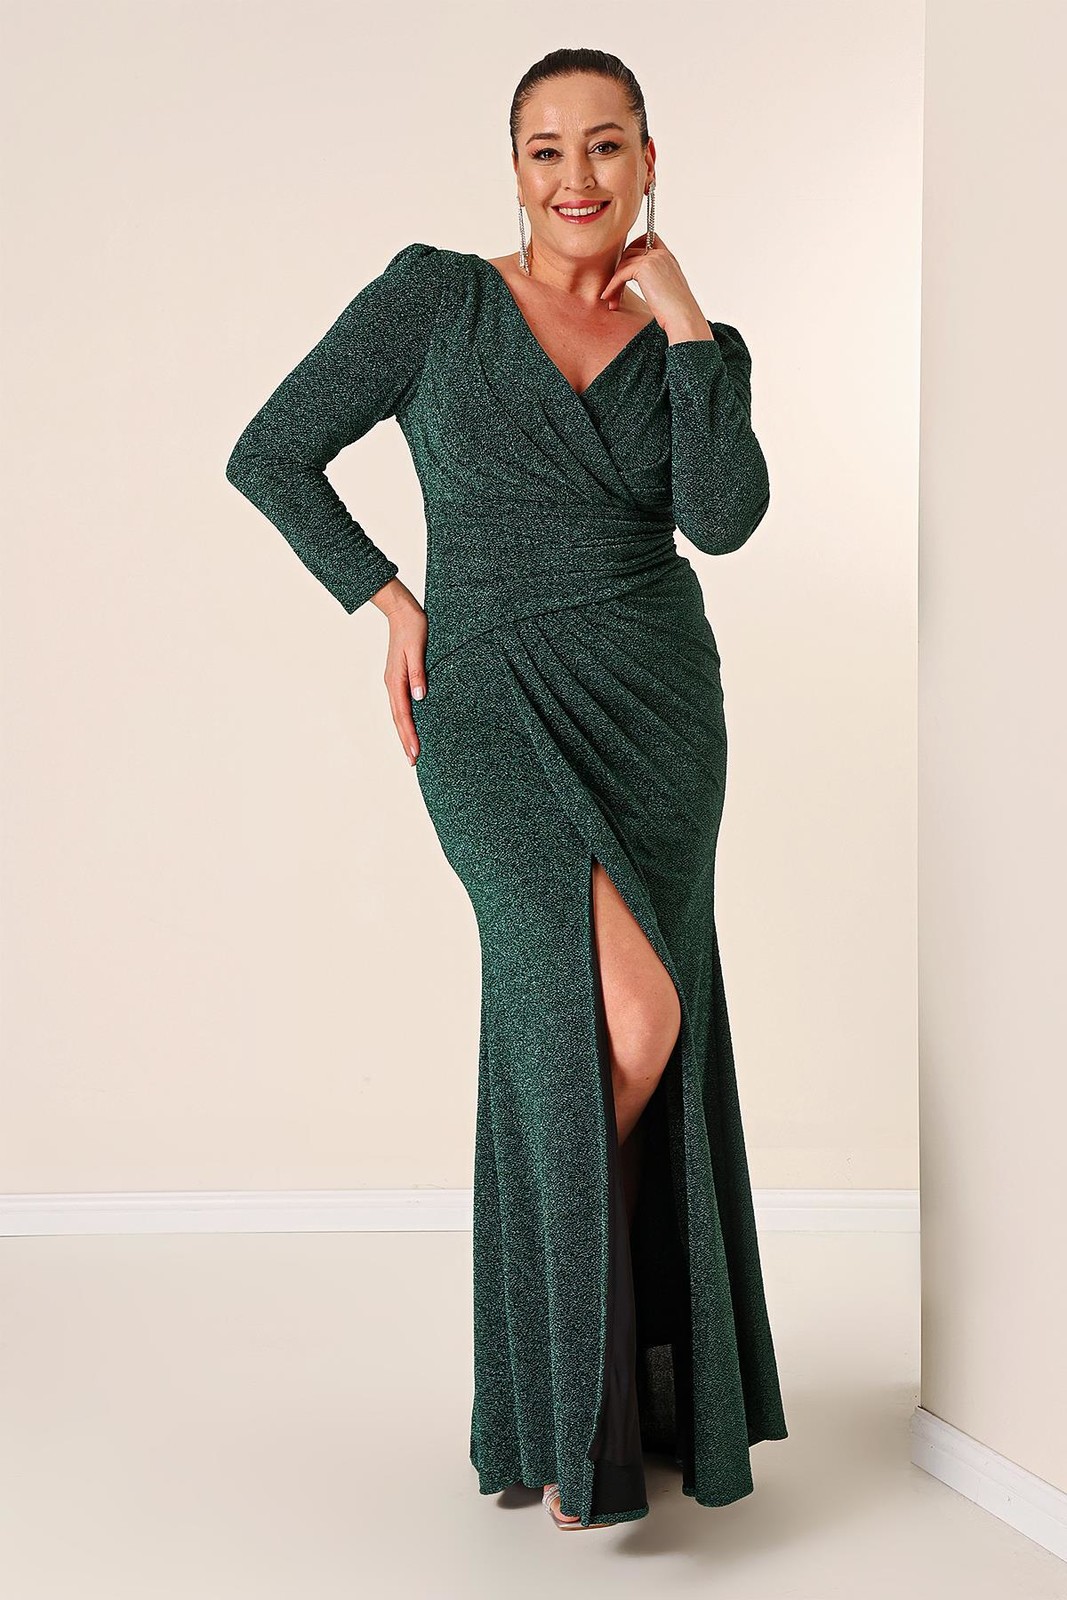 By Saygı Double Breasted Neck Front Draped Long Sleeve Lined Knitted Fabric Glitter Plus Size Long Dress